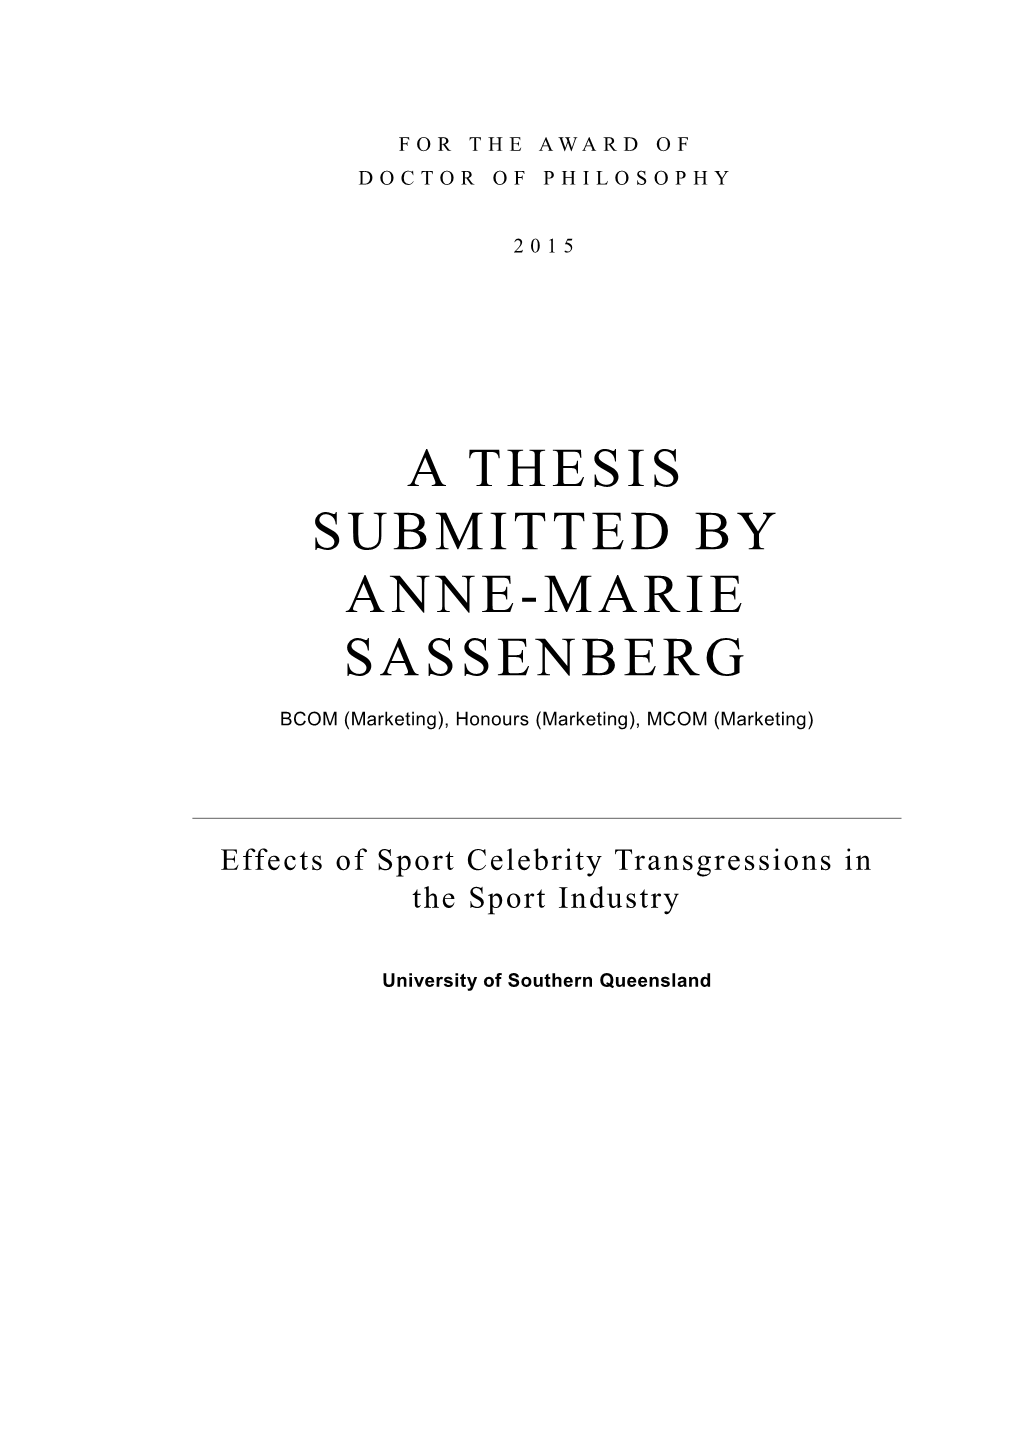 A Thesis Submitted by Anne-Marie Sassenberg